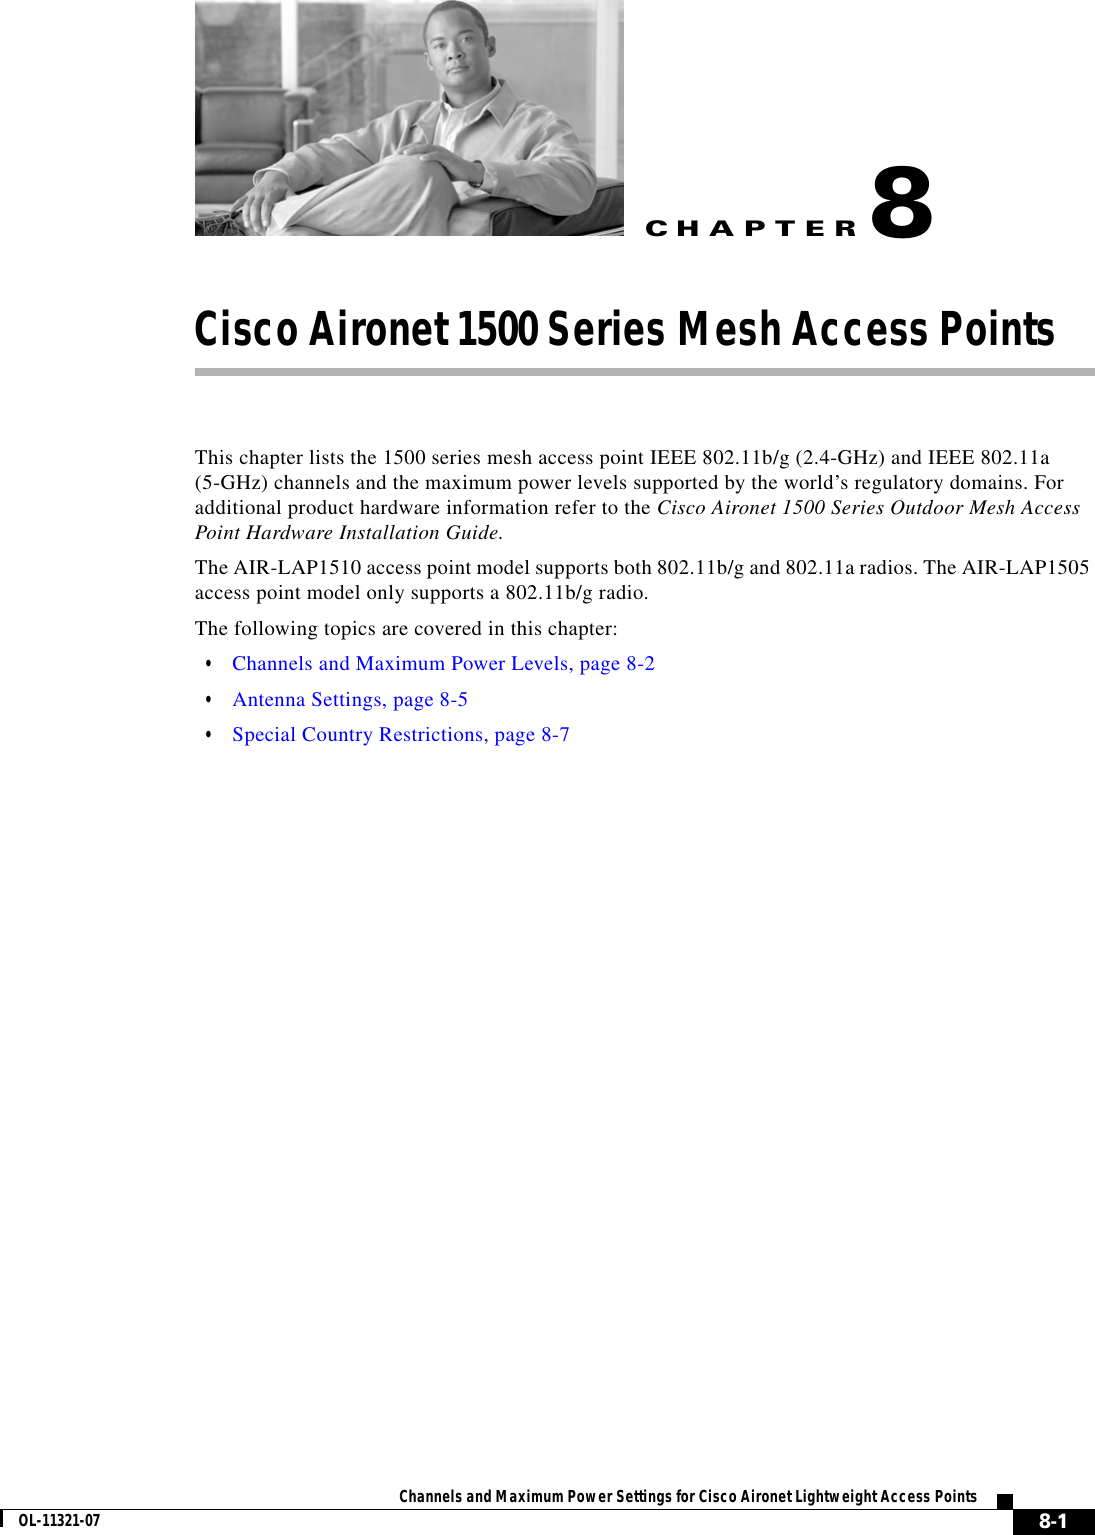 CHAPTER 8-1Channels and Maximum Power Settings for Cisco Aironet Lightweight Access PointsOL-11321-078Cisco Aironet 1500 Series Mesh Access Points This chapter lists the 1500 series mesh access point IEEE 802.11b/g (2.4-GHz) and IEEE 802.11a (5-GHz) channels and the maximum power levels supported by the world’s regulatory domains. For additional product hardware information refer to the Cisco Aironet 1500 Series Outdoor Mesh Access Point Hardware Installation Guide.The AIR-LAP1510 access point model supports both 802.11b/g and 802.11a radios. The AIR-LAP1505 access point model only supports a 802.11b/g radio.The following topics are covered in this chapter:  • Channels and Maximum Power Levels, page 8-2  • Antenna Settings, page 8-5  • Special Country Restrictions, page 8-7